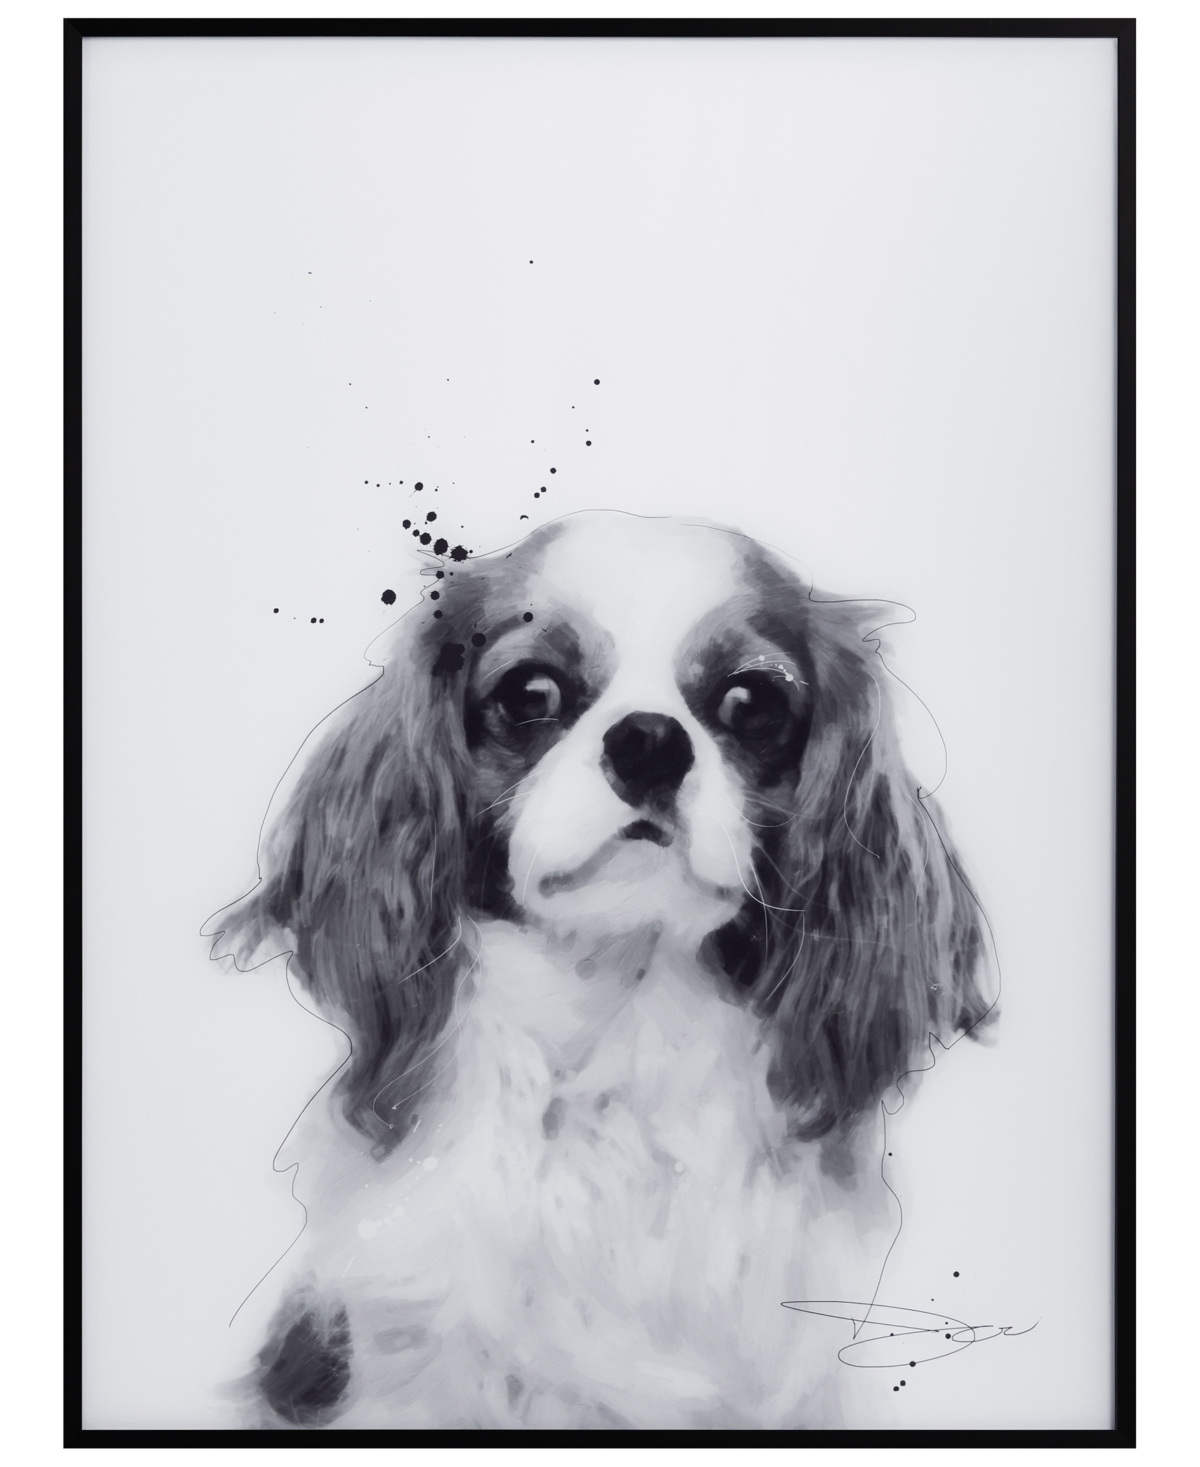 Empire Art Direct "king Charles Spaniel" Pet Paintings On Printed Glass Encased With A Black Anodized Frame, 24" X 18" In Black And White